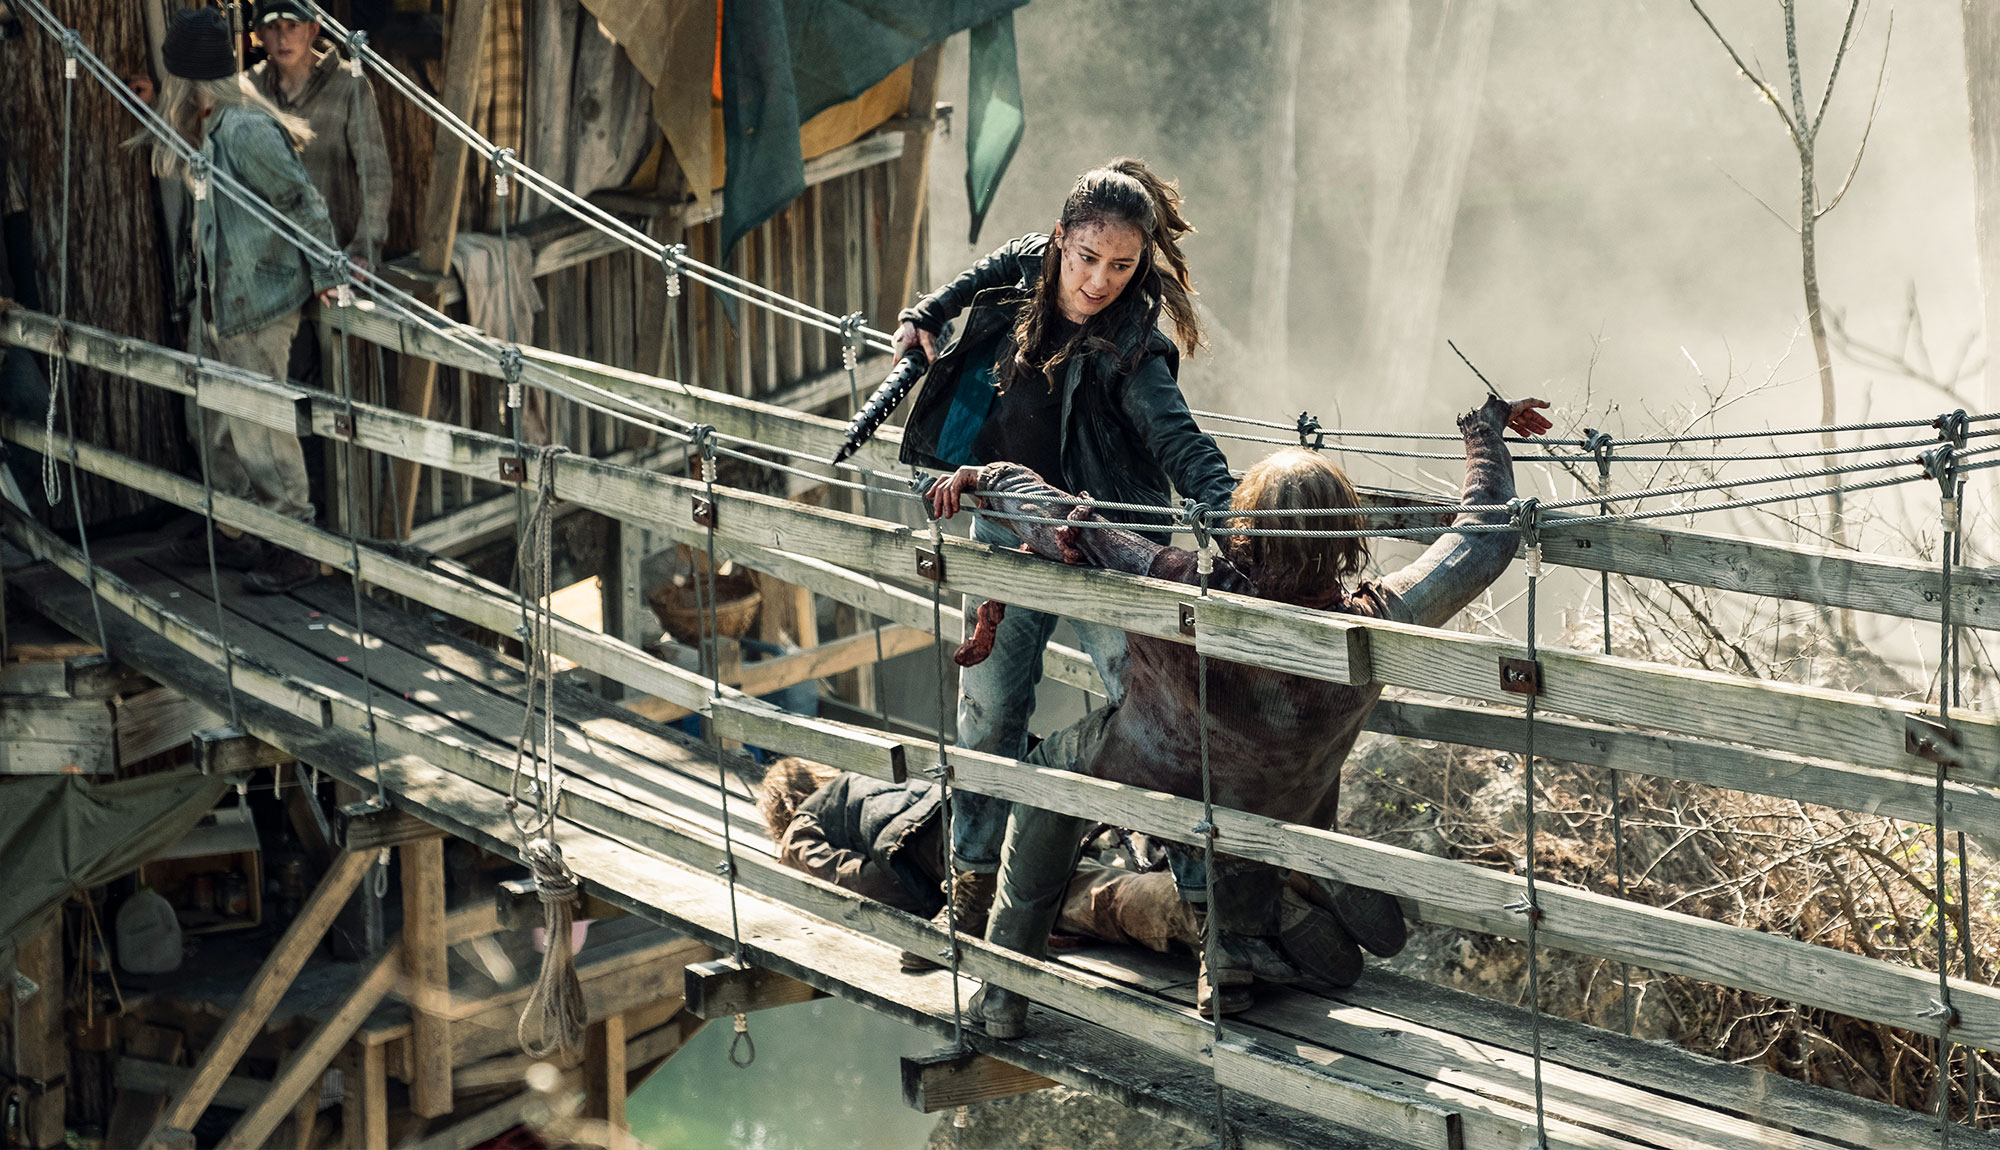 The Best Images From Fear the Walking Dead Episode 507